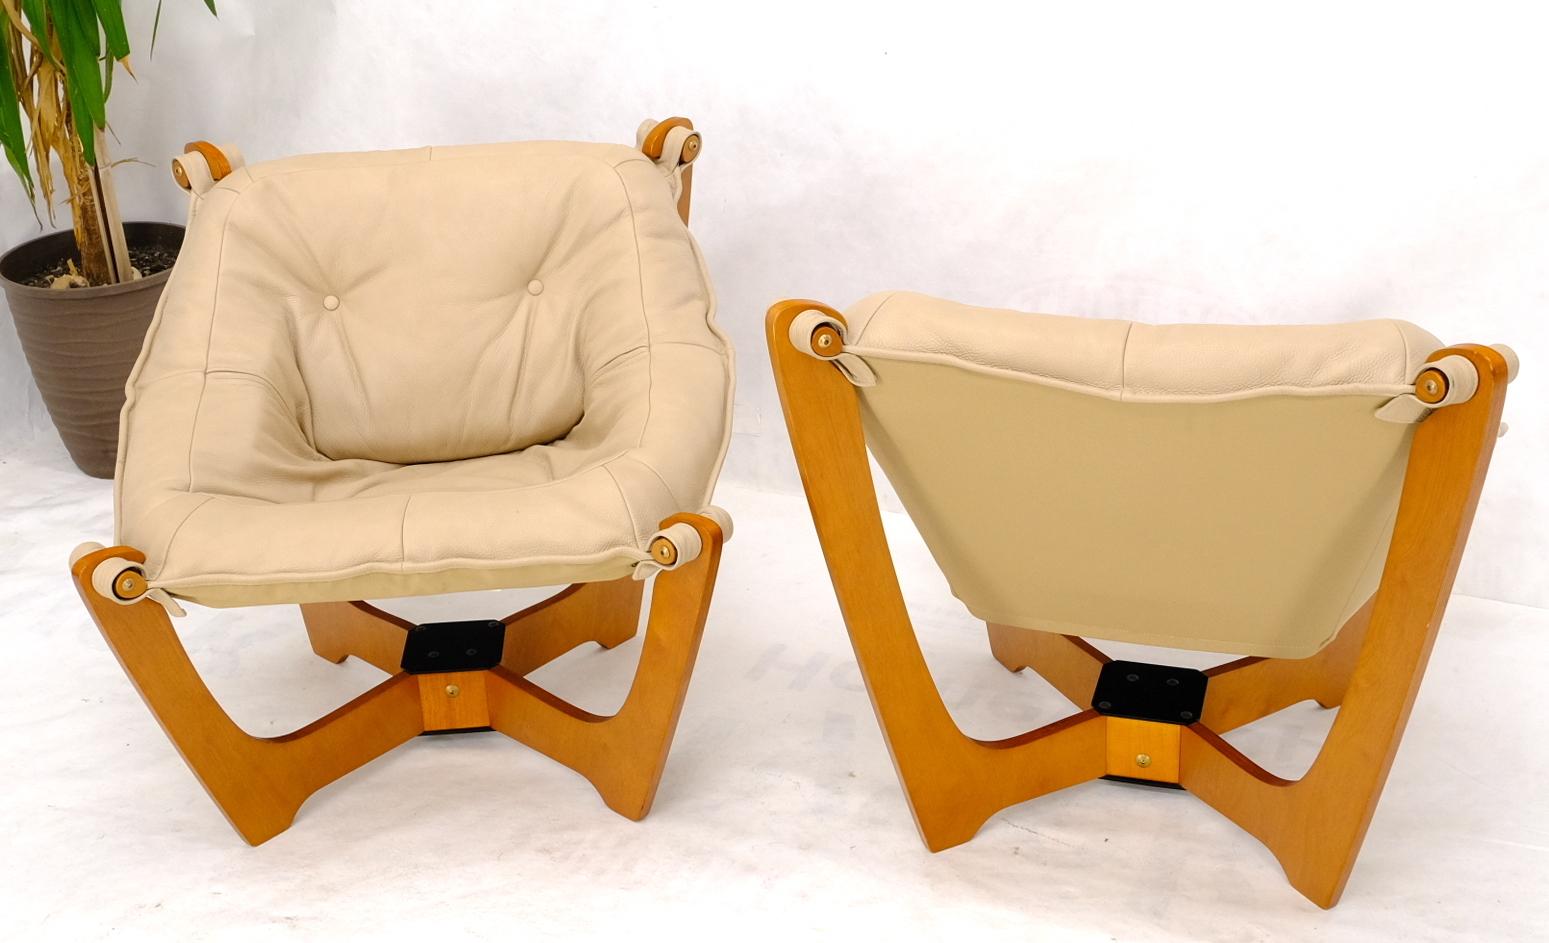 Pair of Mid Century Danish Modern Teak Frames Leather Sling Seat Lounge Chairs For Sale 1